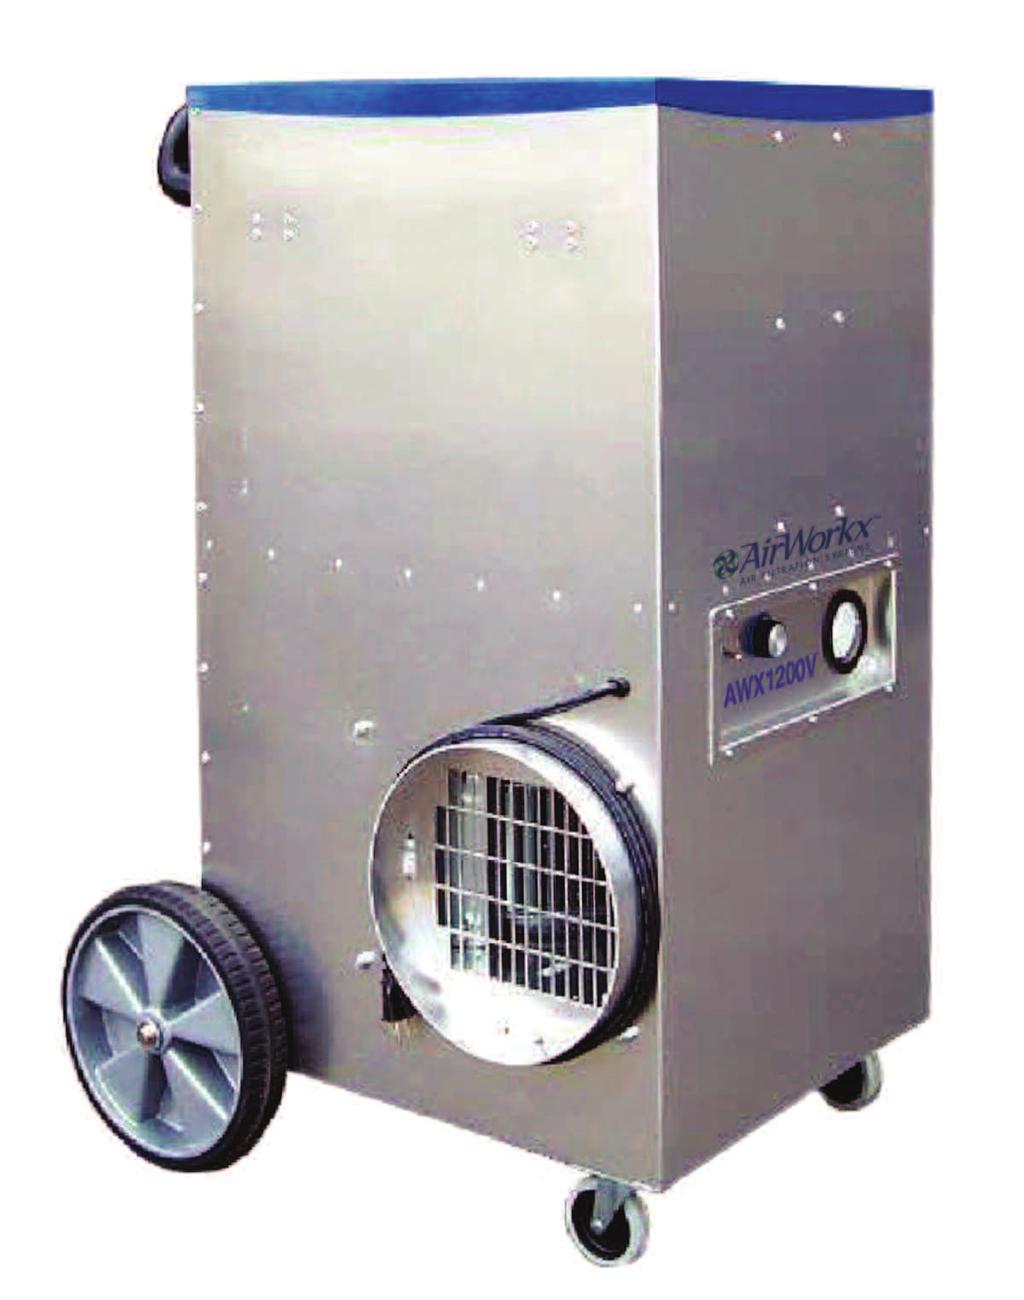 Medium duty negative air machine used in mold, asbestos, and lead abatement projects. Low profile (horizontal) machine with HEPA filter and optional activated carbon filters.